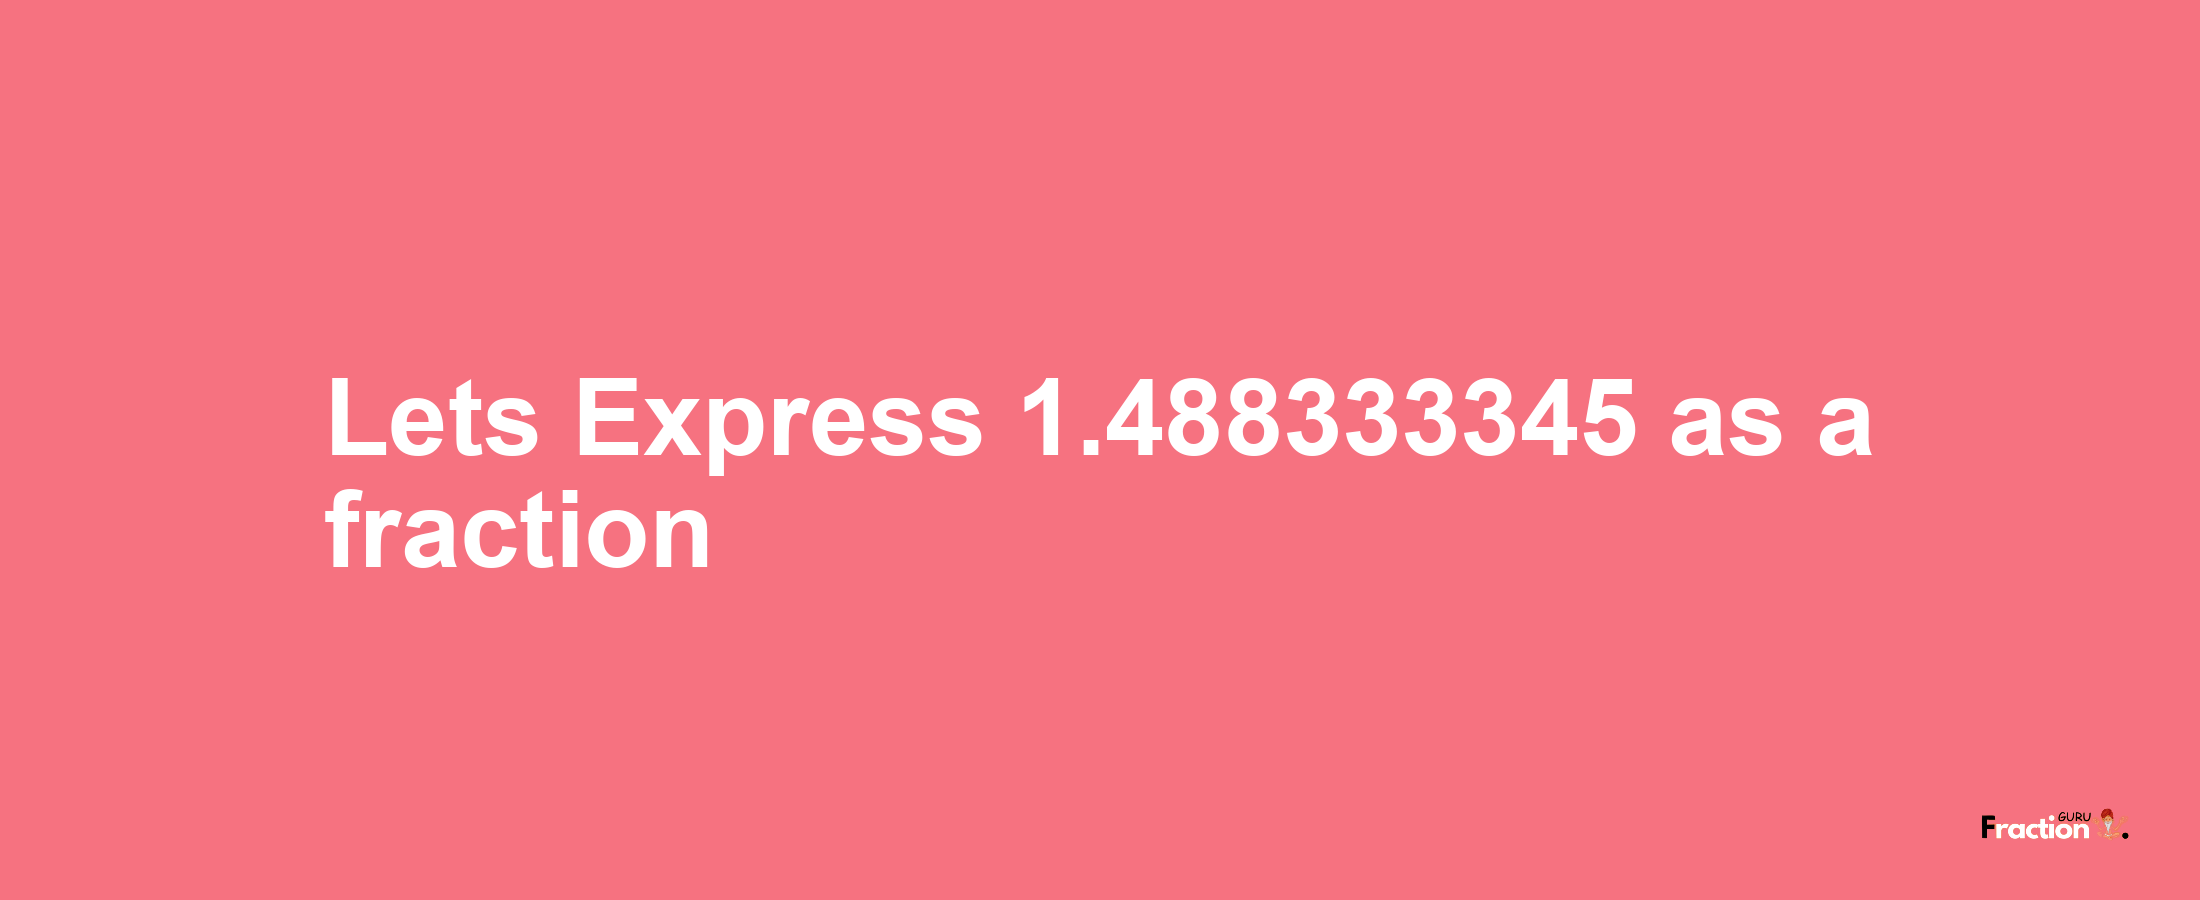 Lets Express 1.488333345 as afraction